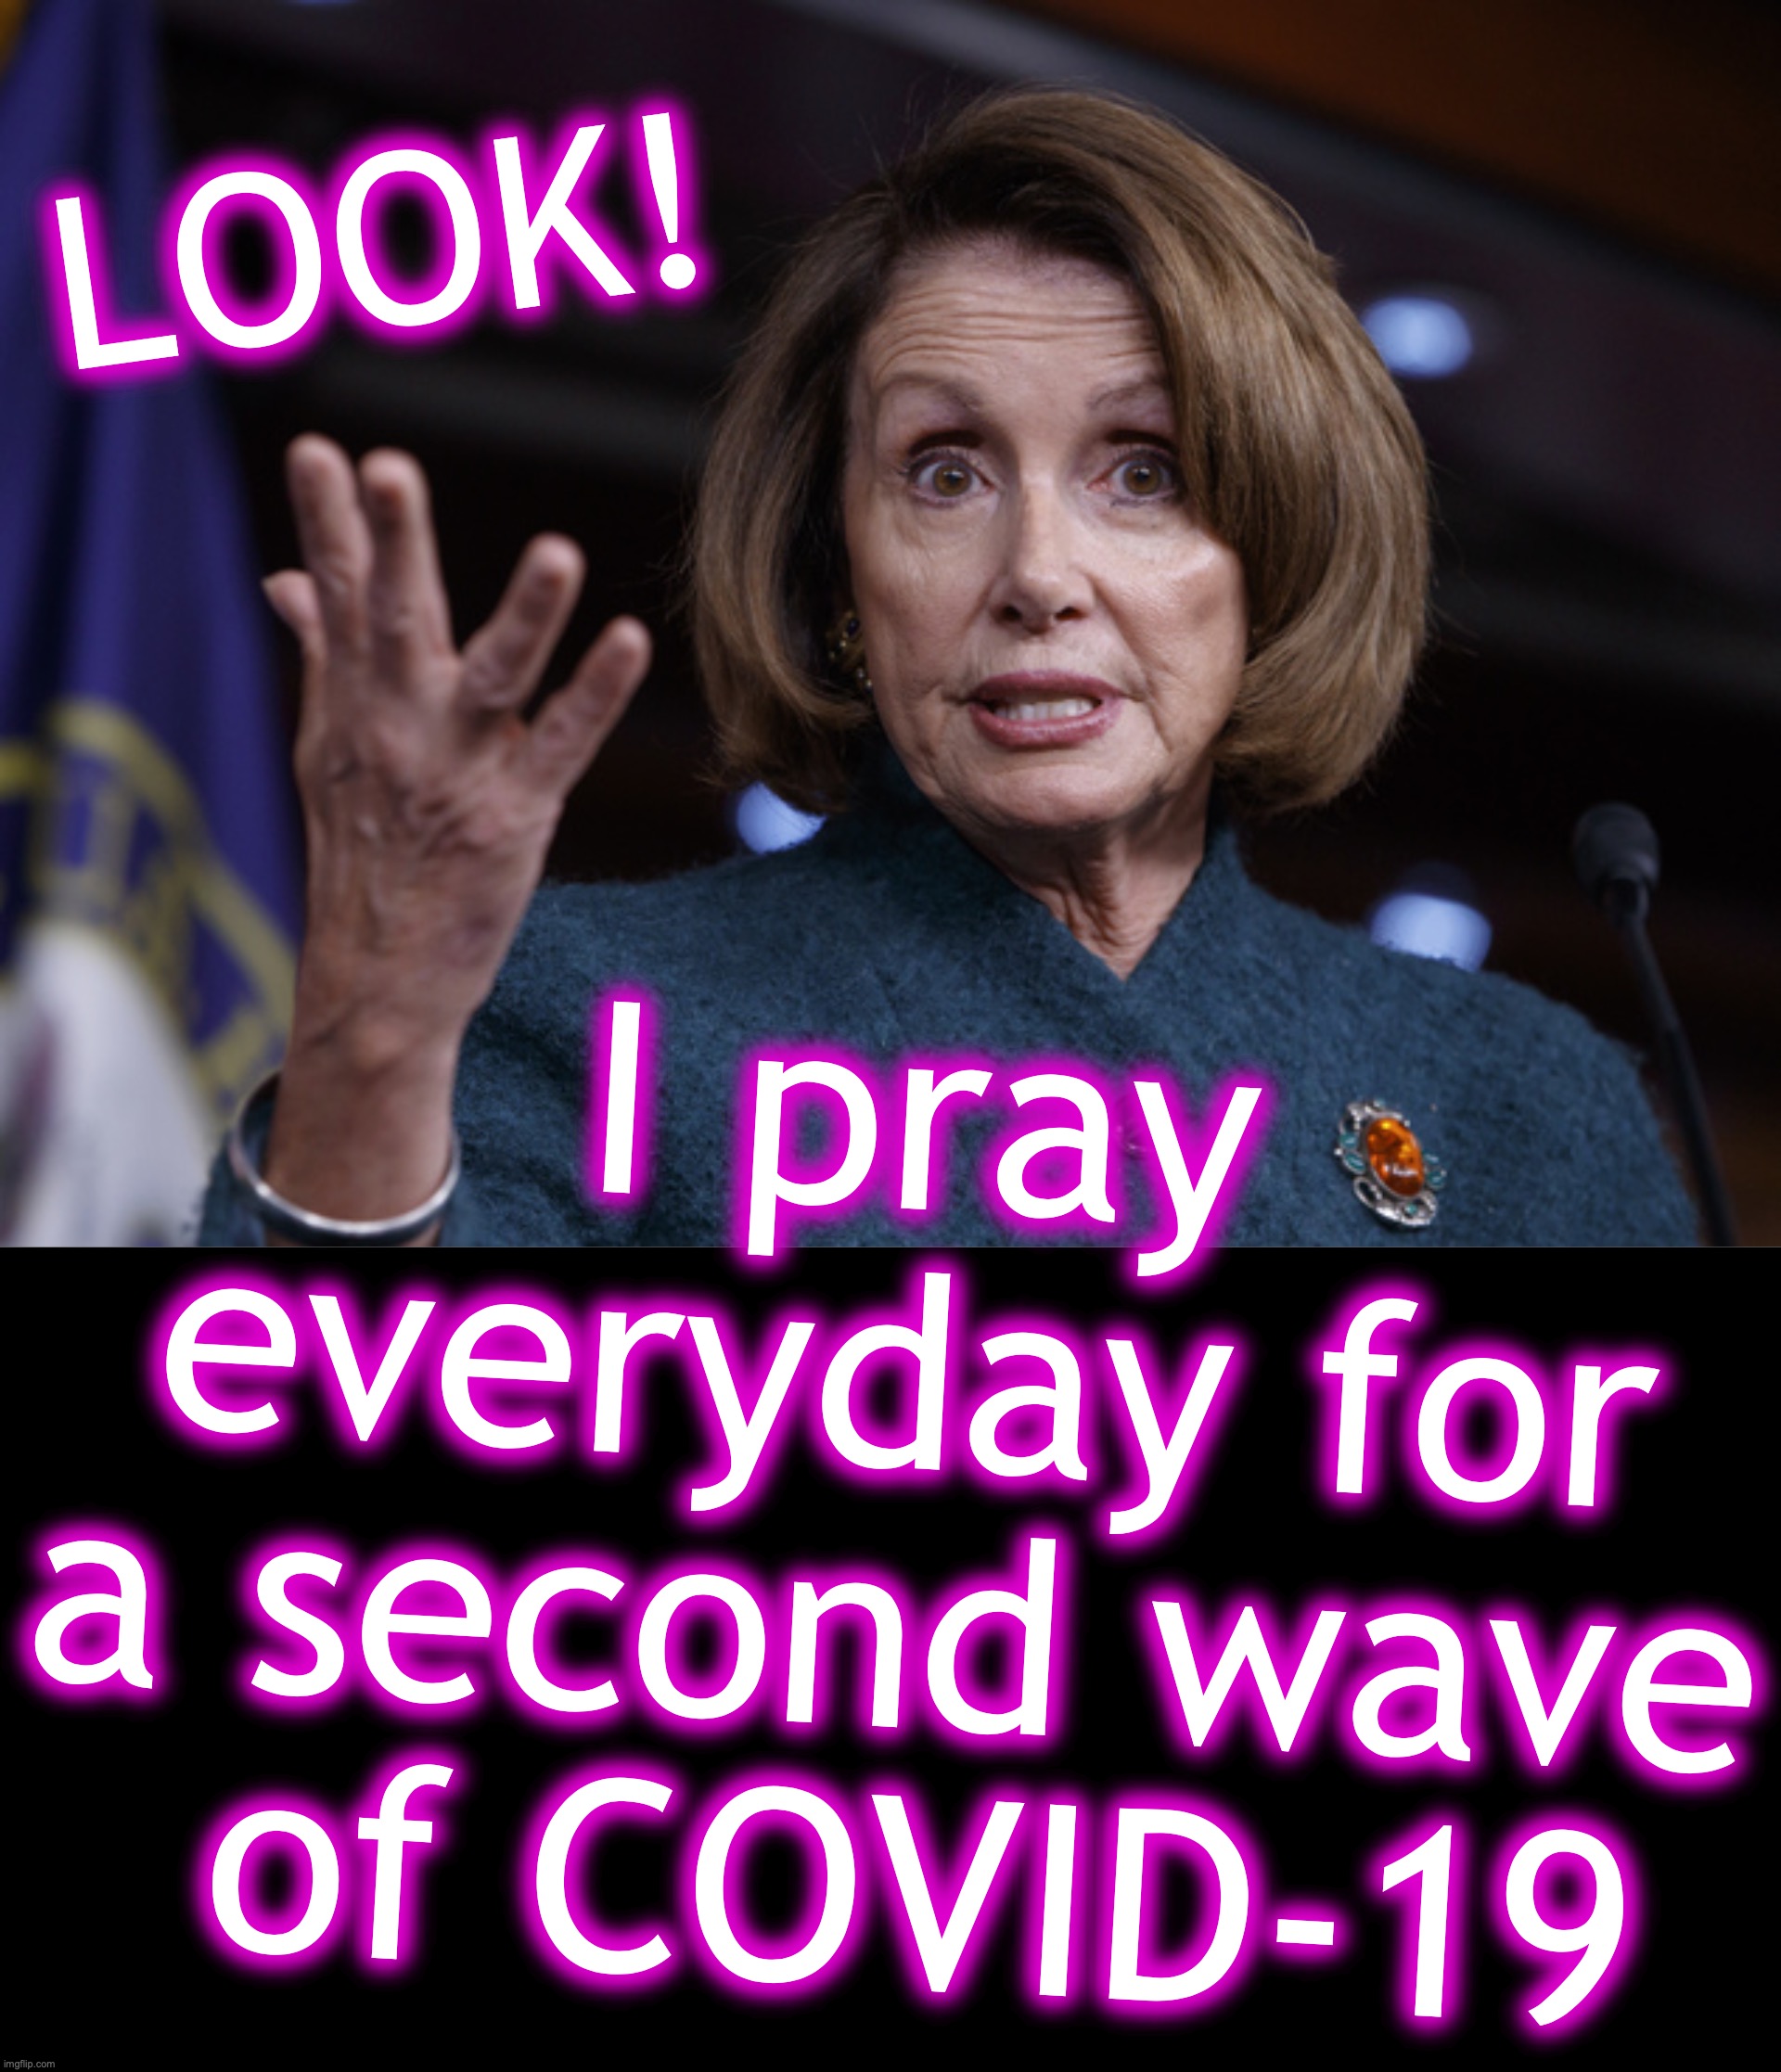 LOOK! I pray everyday for a second wave
 of COVID-19 | image tagged in nancy pelosi,covid-19,coronavirus,second,wave | made w/ Imgflip meme maker